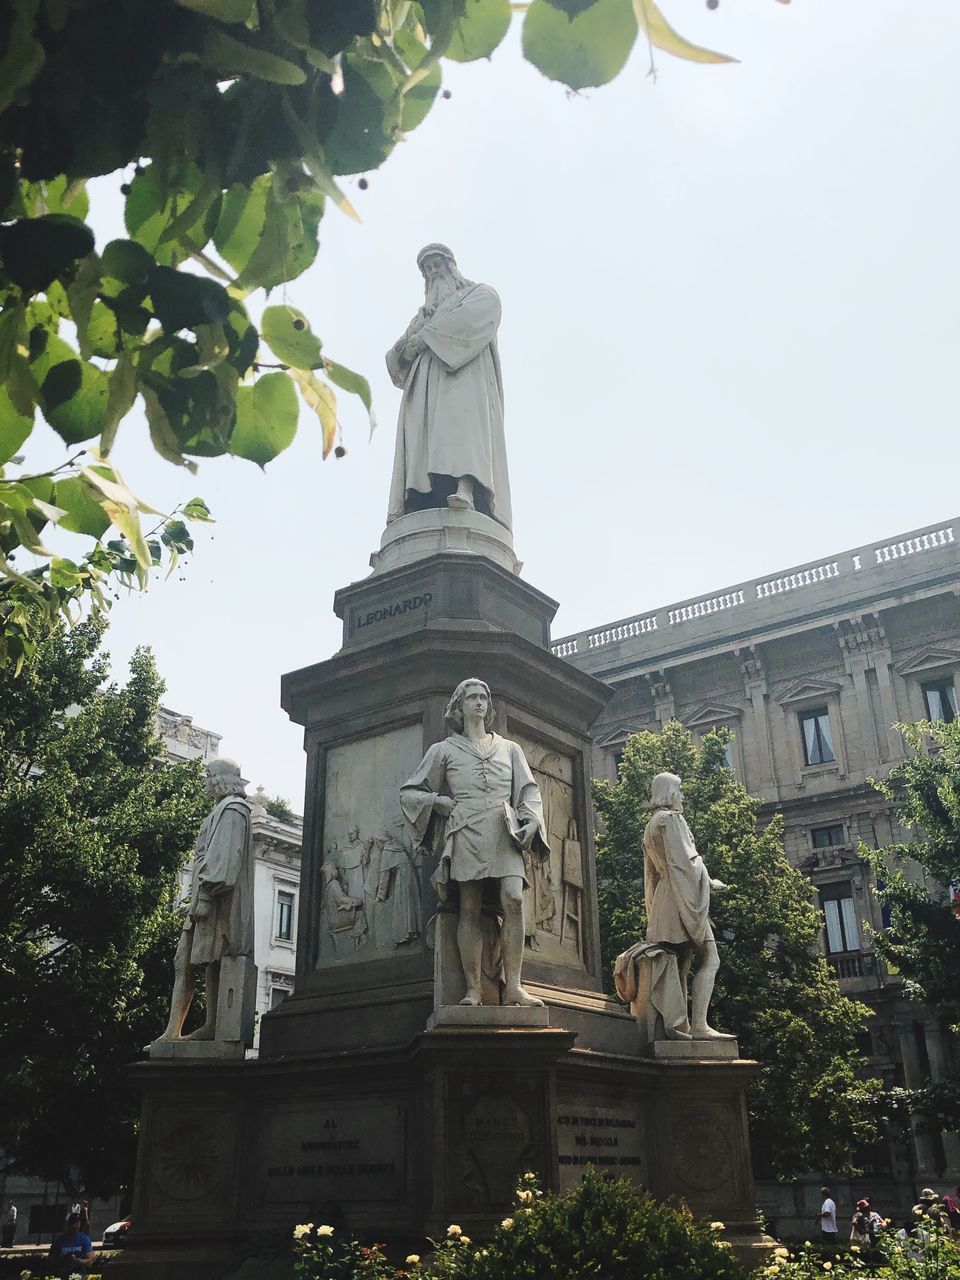 LOW ANGLE VIEW OF STATUES AGAINST SKY